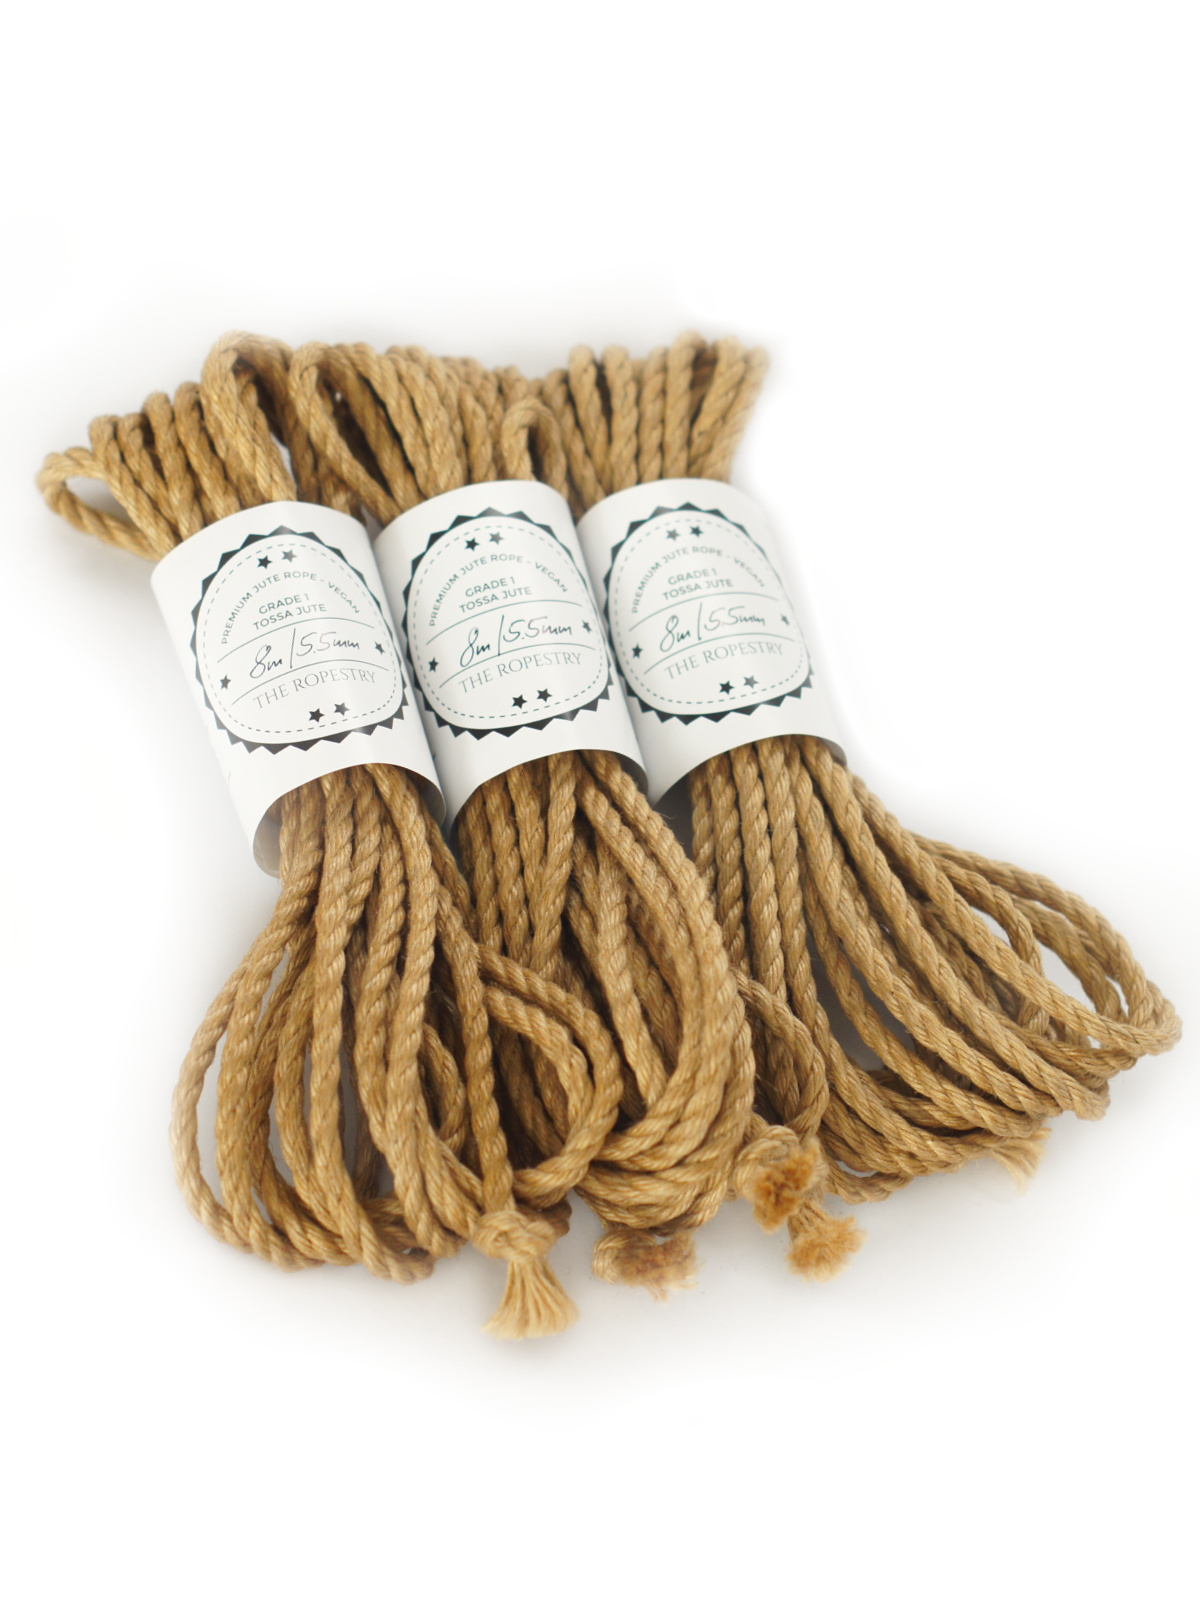 B-STOCK 3pc set, ∅ 5.5mm, 8m, jute rope, ready for use